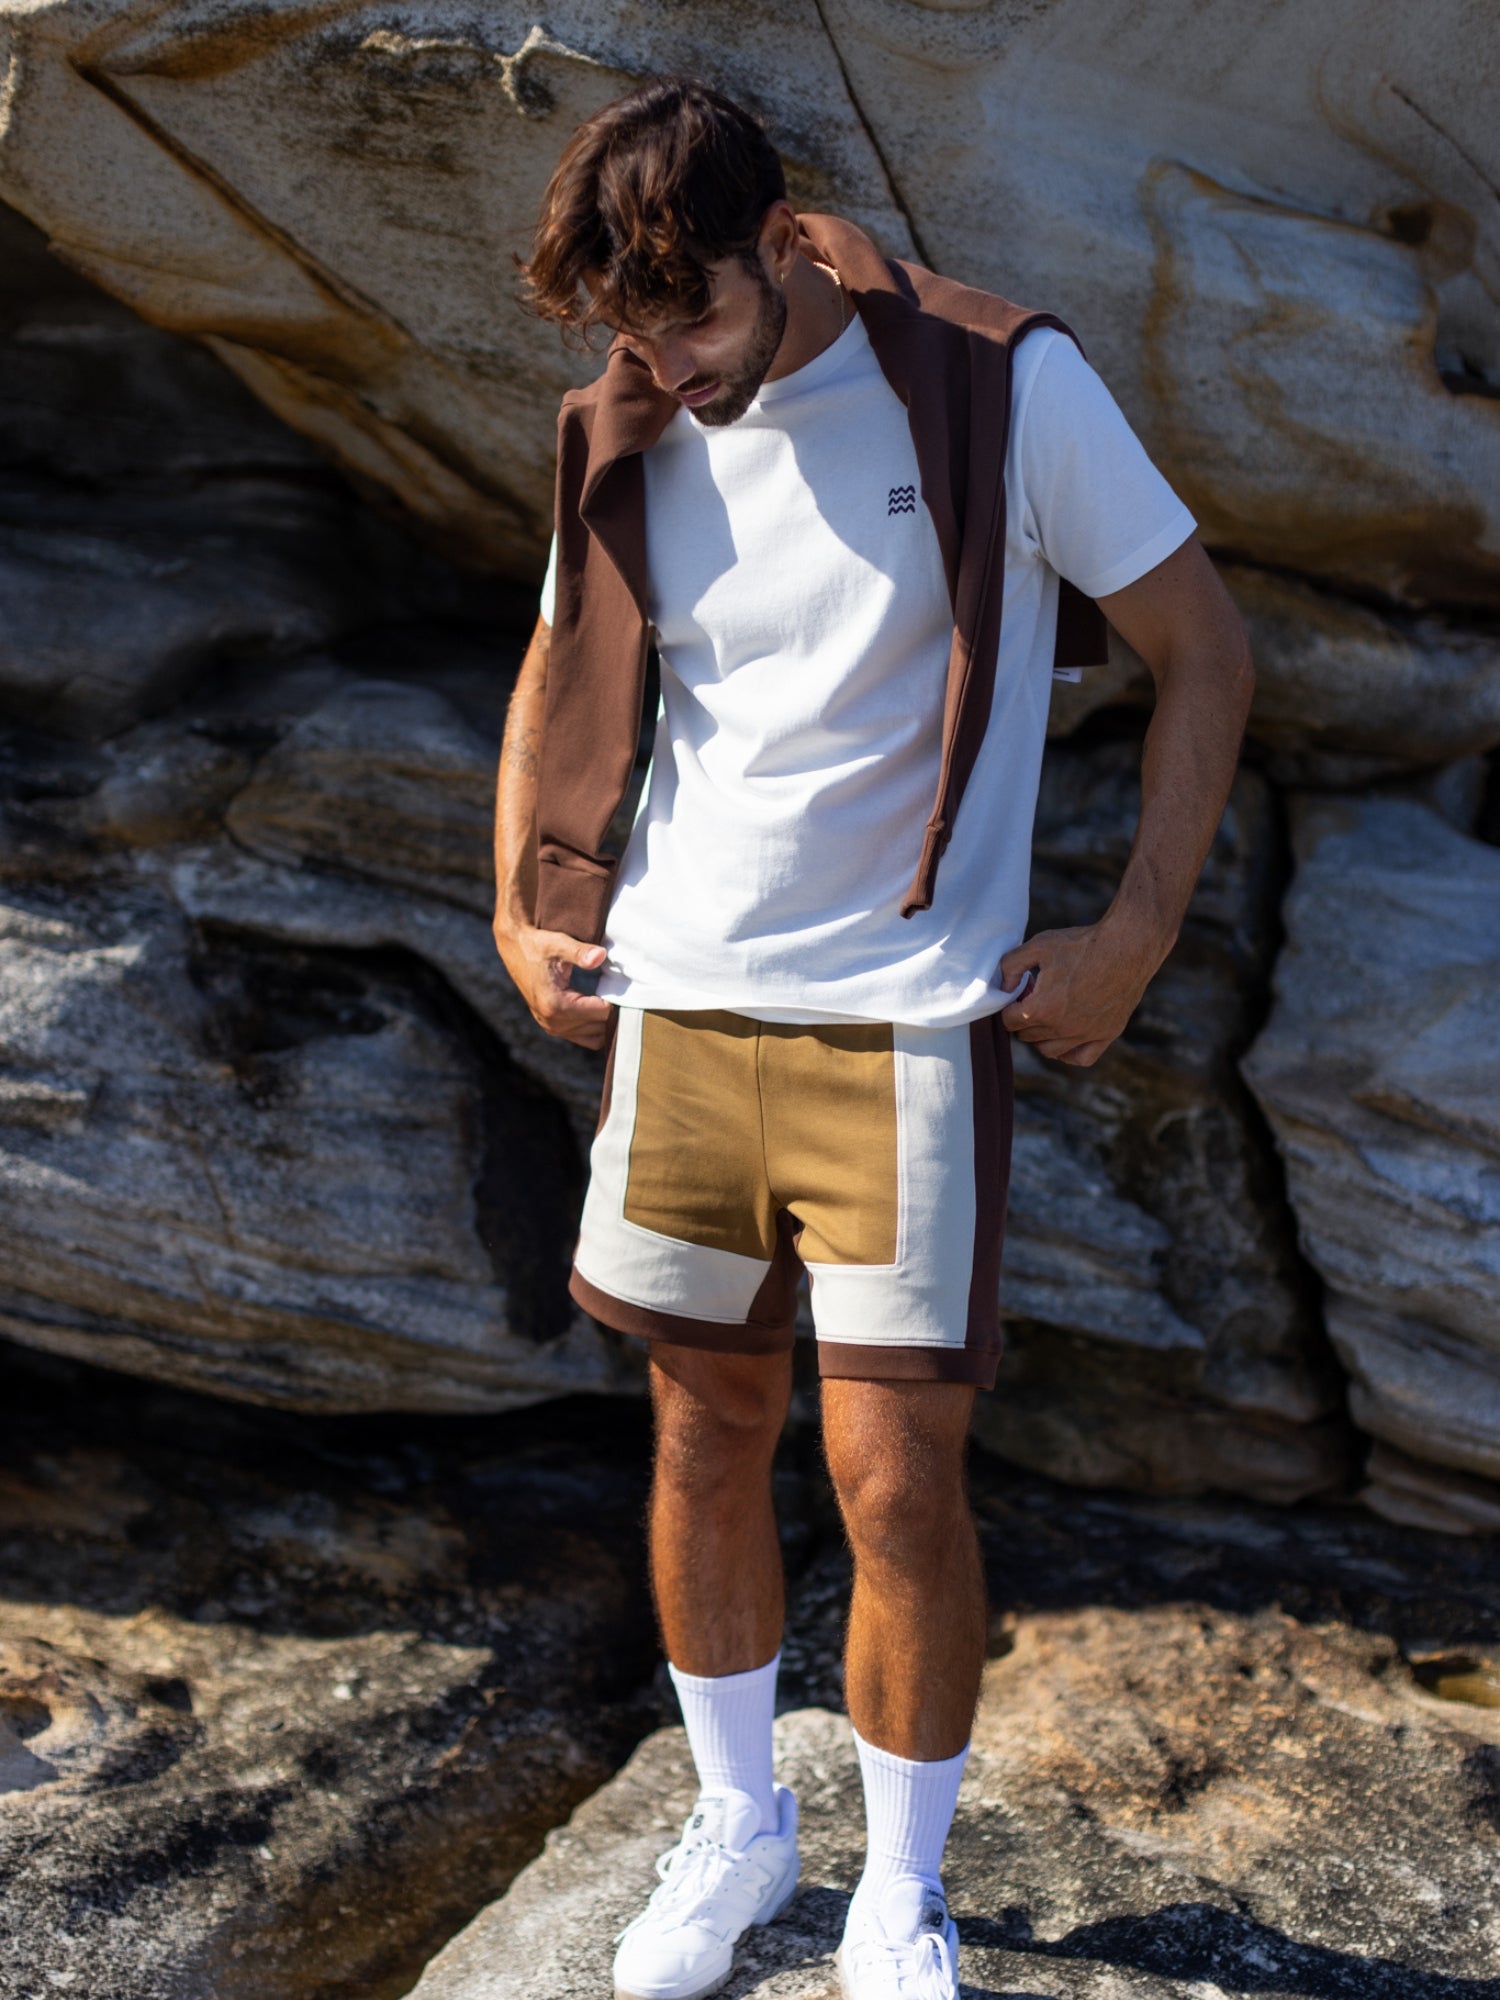 Versatile and sustainable menswear by Bondi Active, tailored for performance and everyday comfort. Featuring eco-friendly materials and modern, athletic designs.